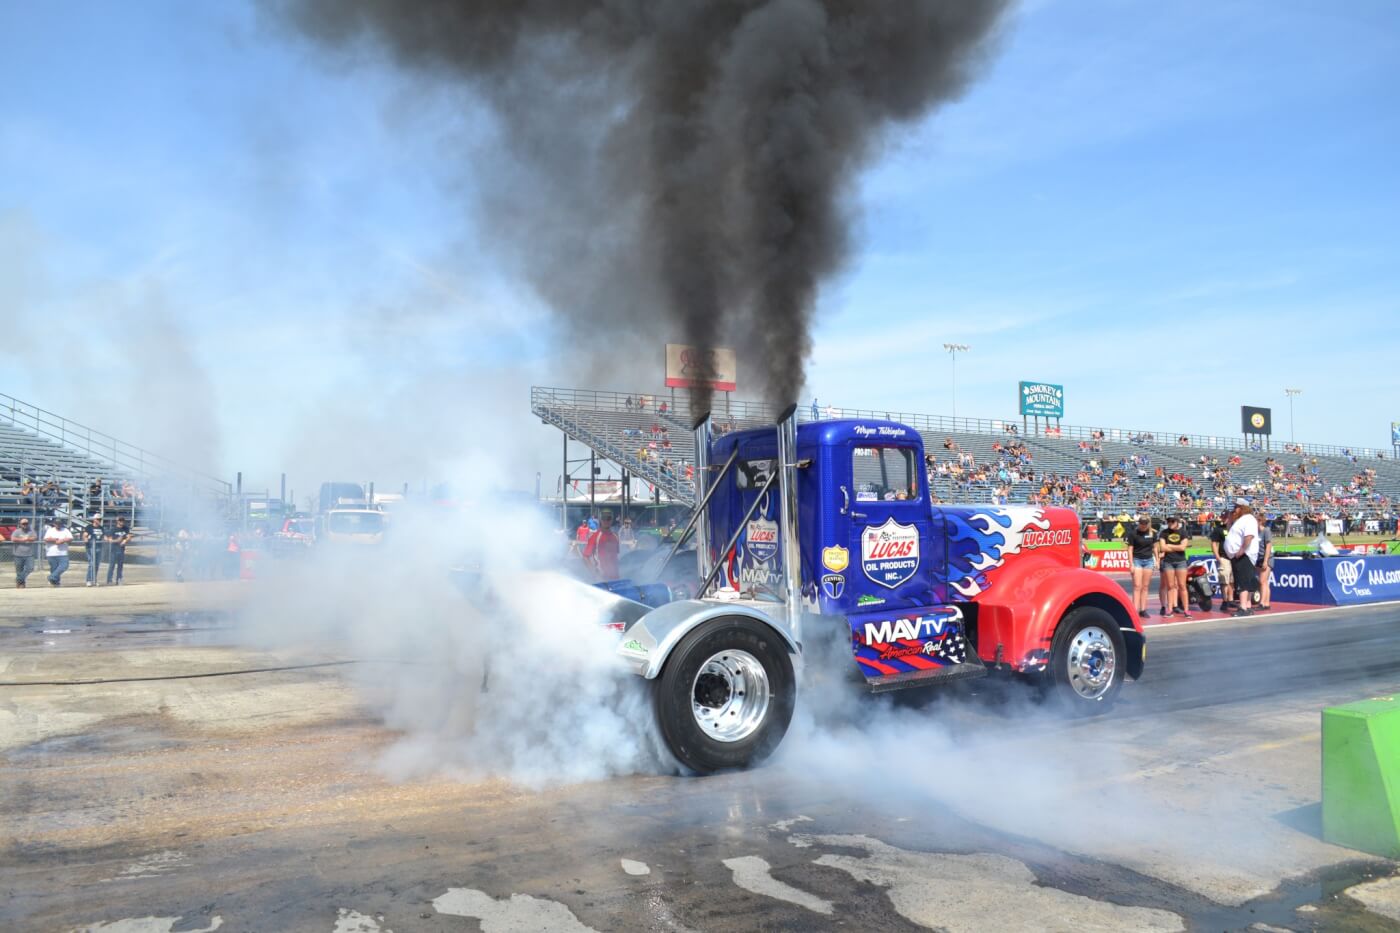 In addition to the pickups, two classes of semi trucks were in attendance at the World Finals. Wayne Talkington took the win in the Hot Rod Semi class, with an impressive 12.14-second elapsed time in the finals.